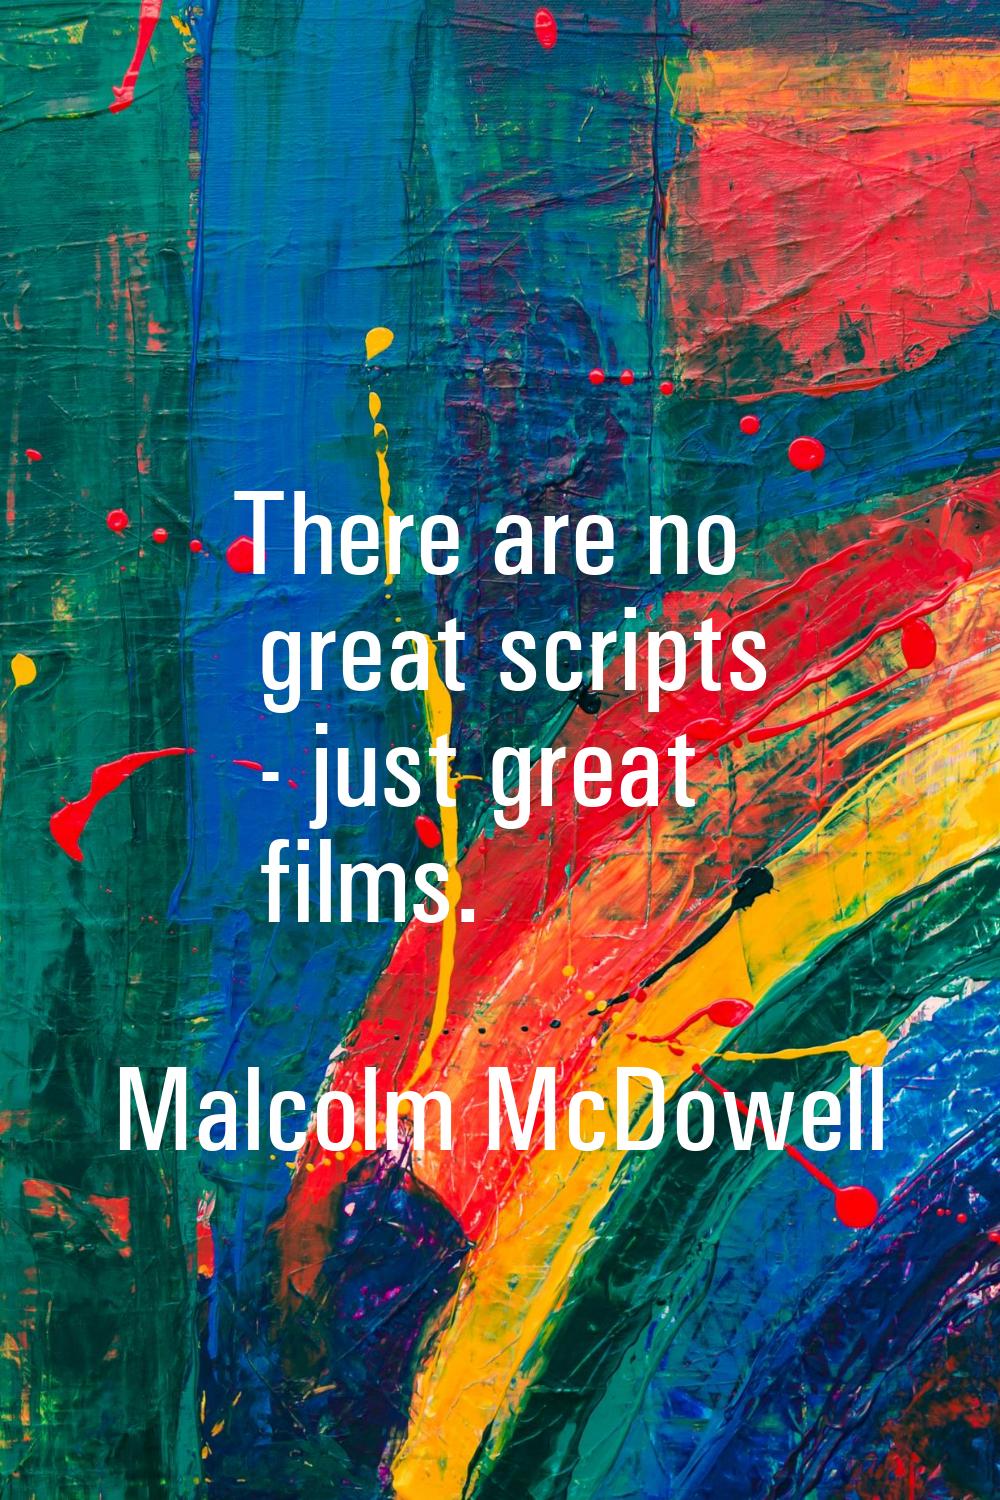 There are no great scripts - just great films.